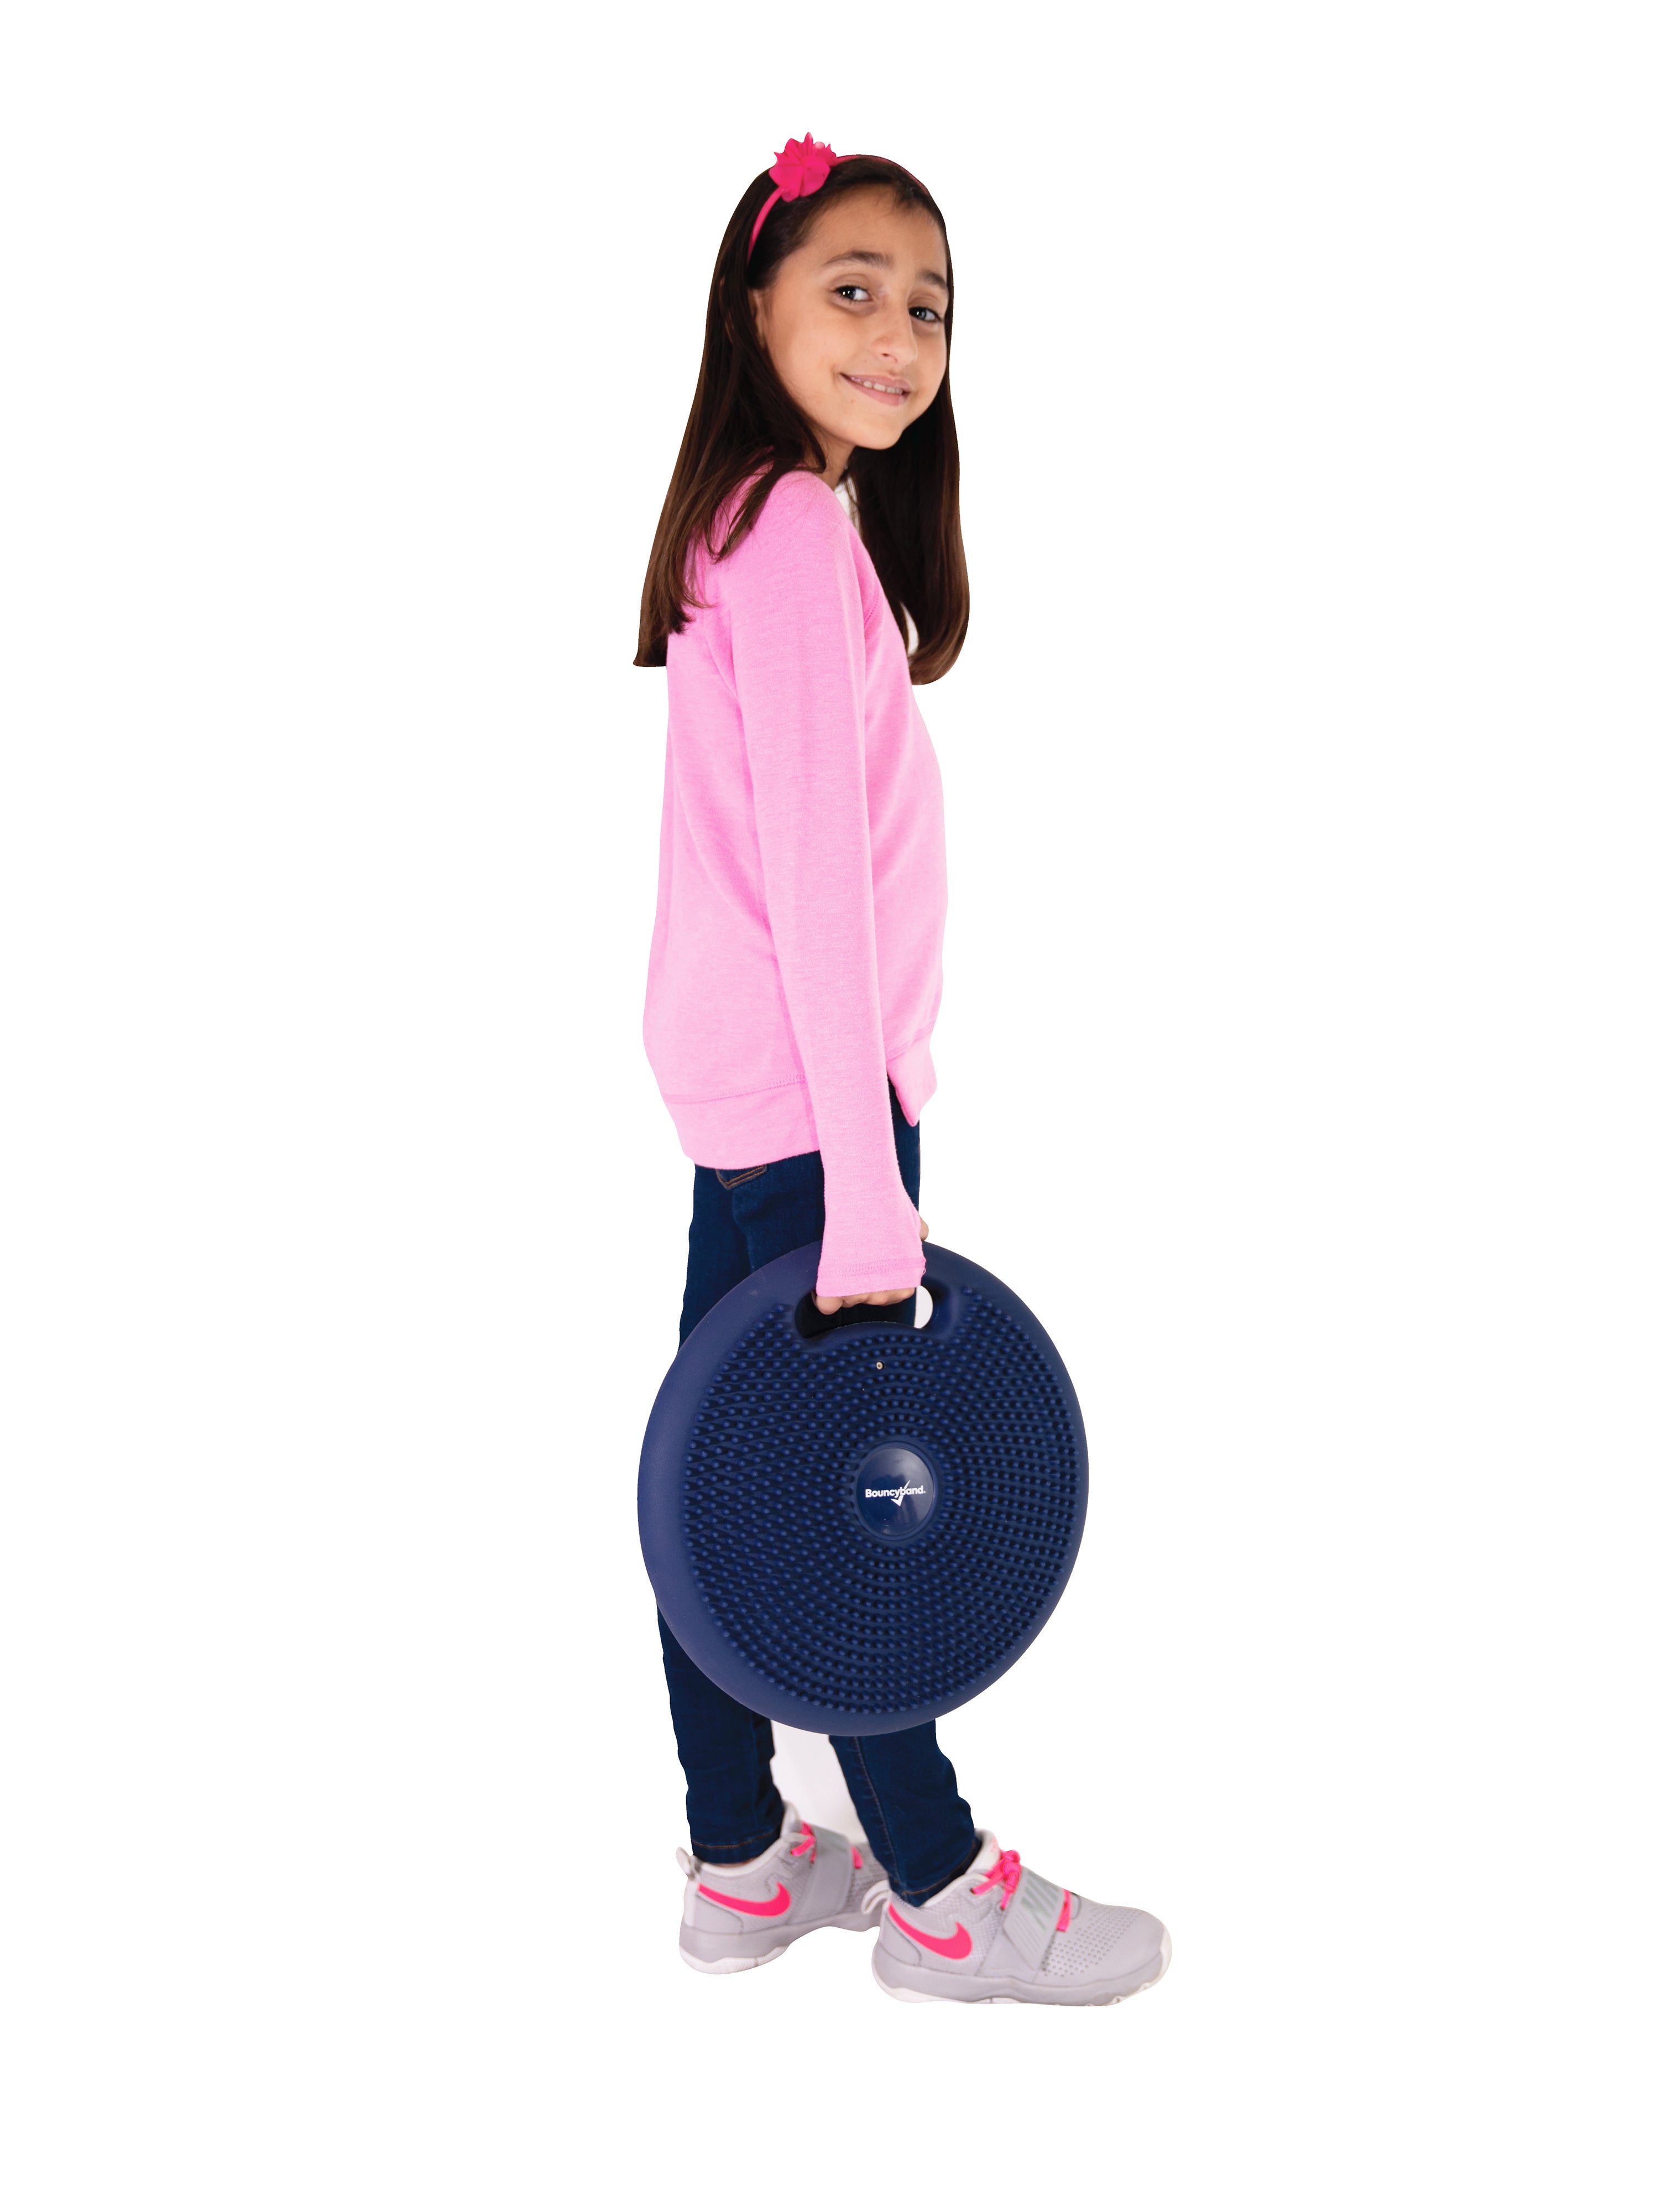 Wiggle Seat Big Sensory Chair Cushion for Elementary/Middle/High School  Kids by Bouncyband®